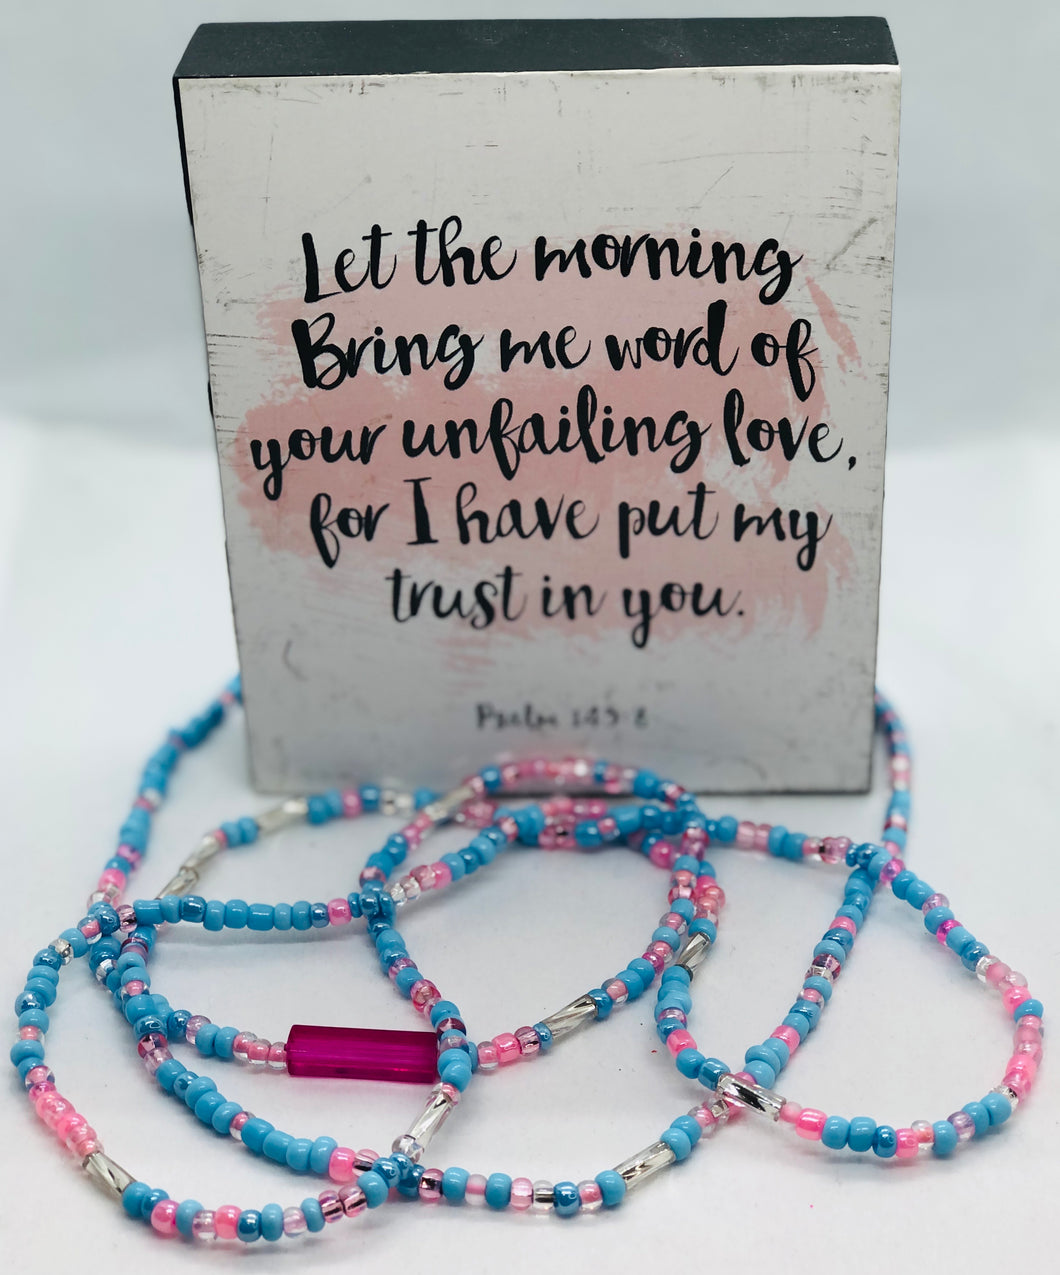 “Baby Girl” Tie on Waist Beads with Pink, Blue and Clear Beads